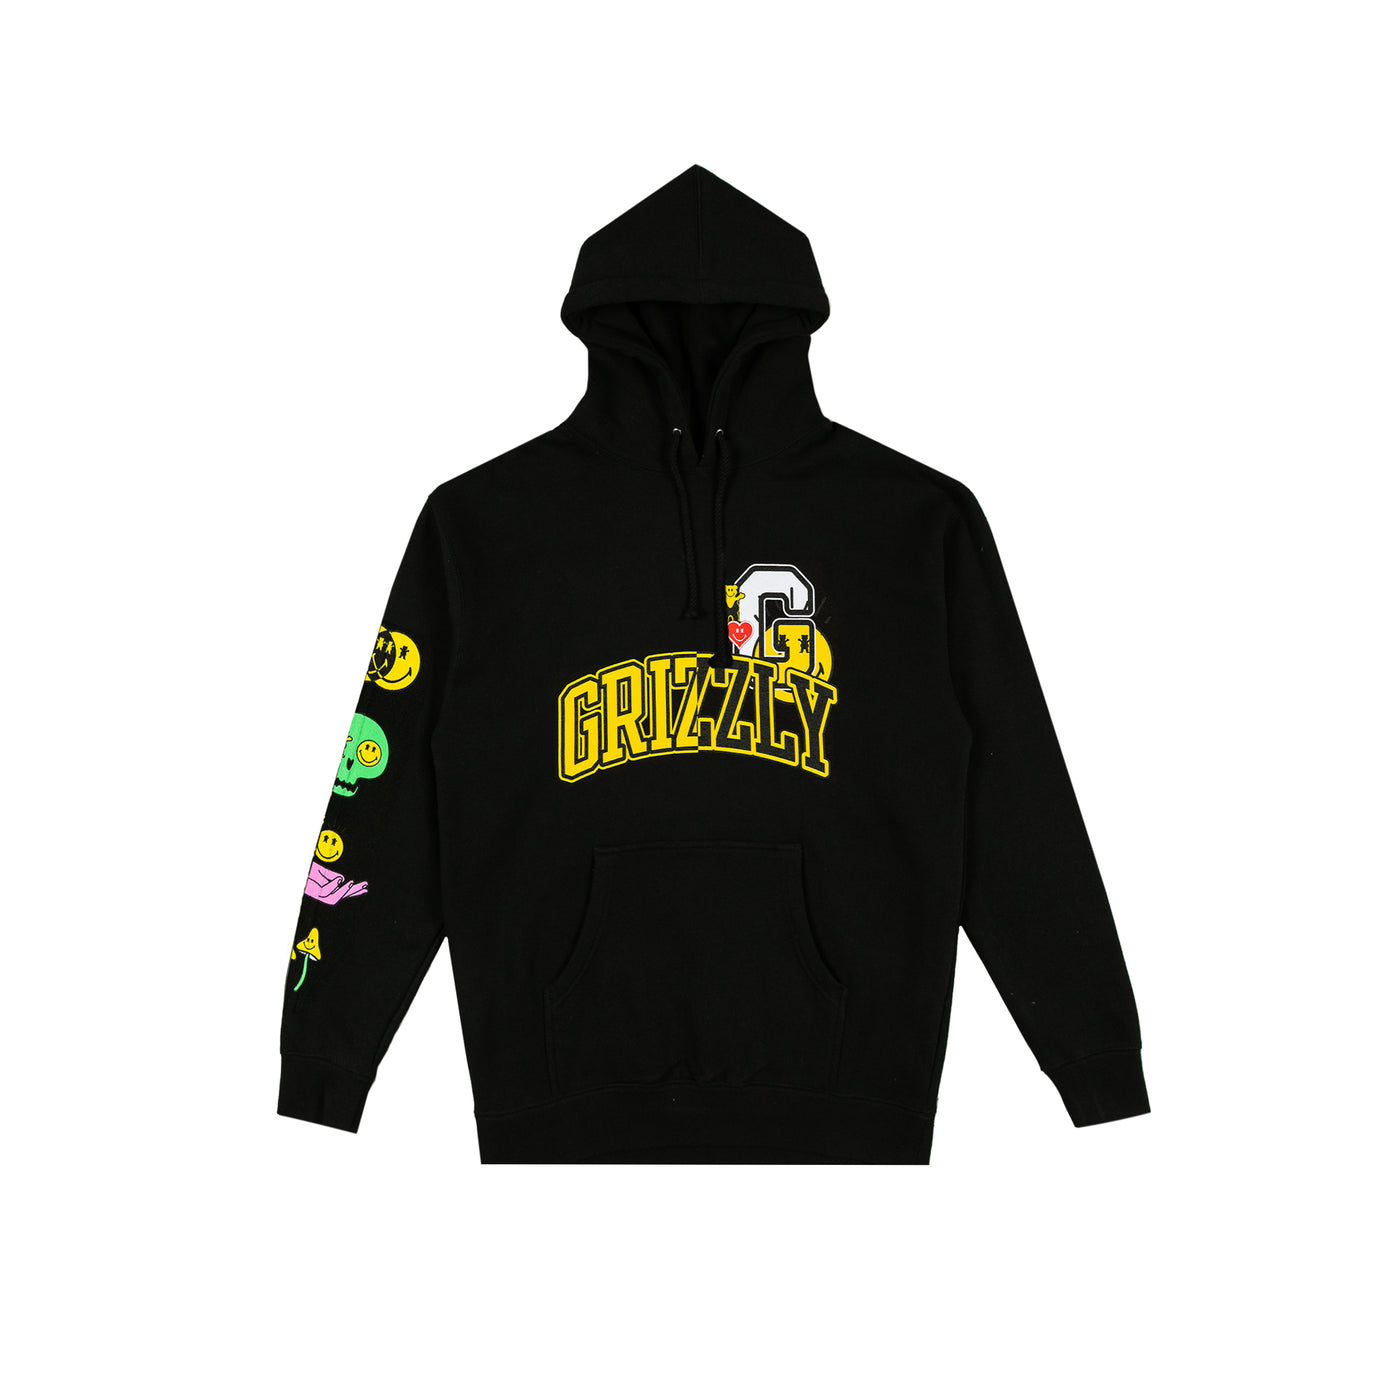 SMILEYWORLD Grizzly x Smiley World Pullover Hoody - Black